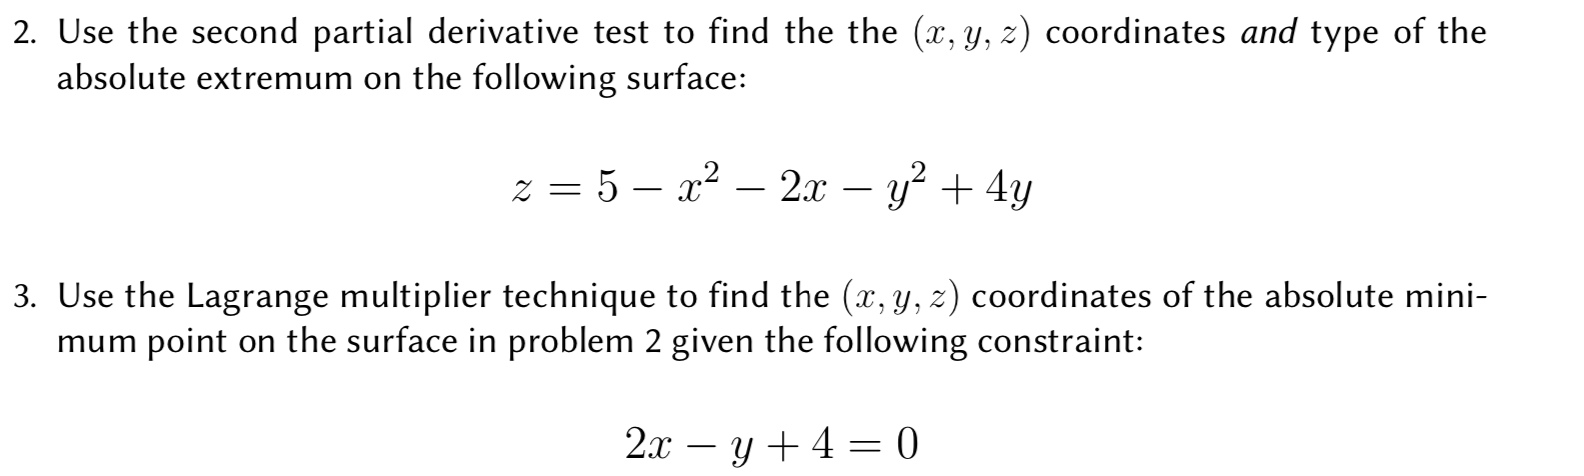 2. Use the second partial derivative test to find the the (x, y, z) coordinates and type of the
absolute extremum on the following surface:
22x -y
3. Use the Lagrange multiplier technique to find the (x, y, z) coordinates of the absolute mini-
mum point on the surface in problem 2 given the following constraint:
